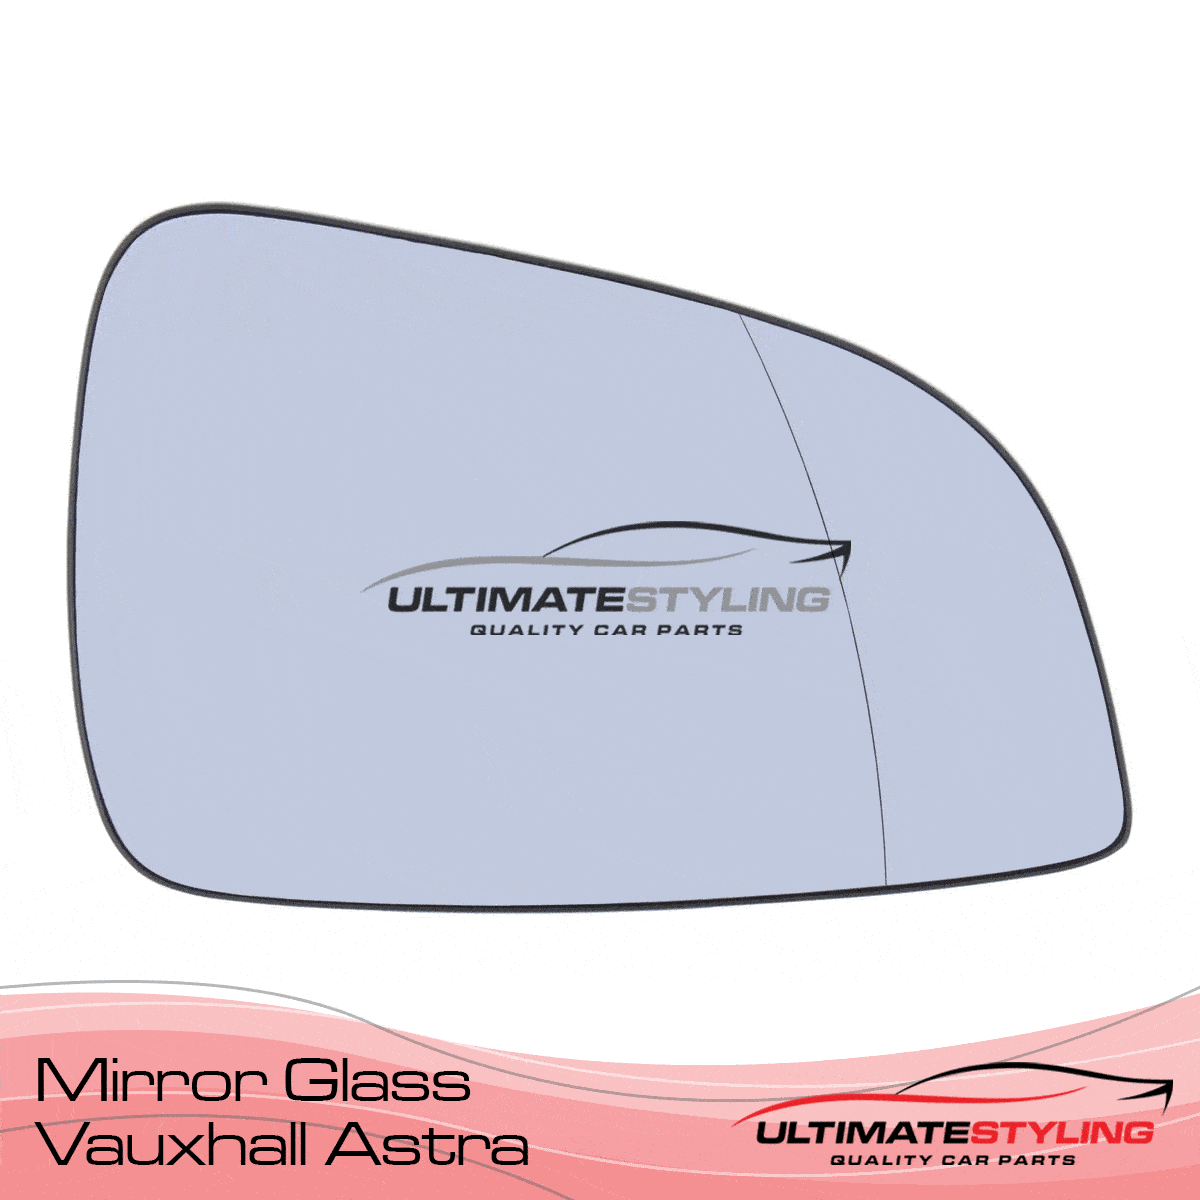 36Front & back view of driver side Vauxhall Astra wing mirror glass